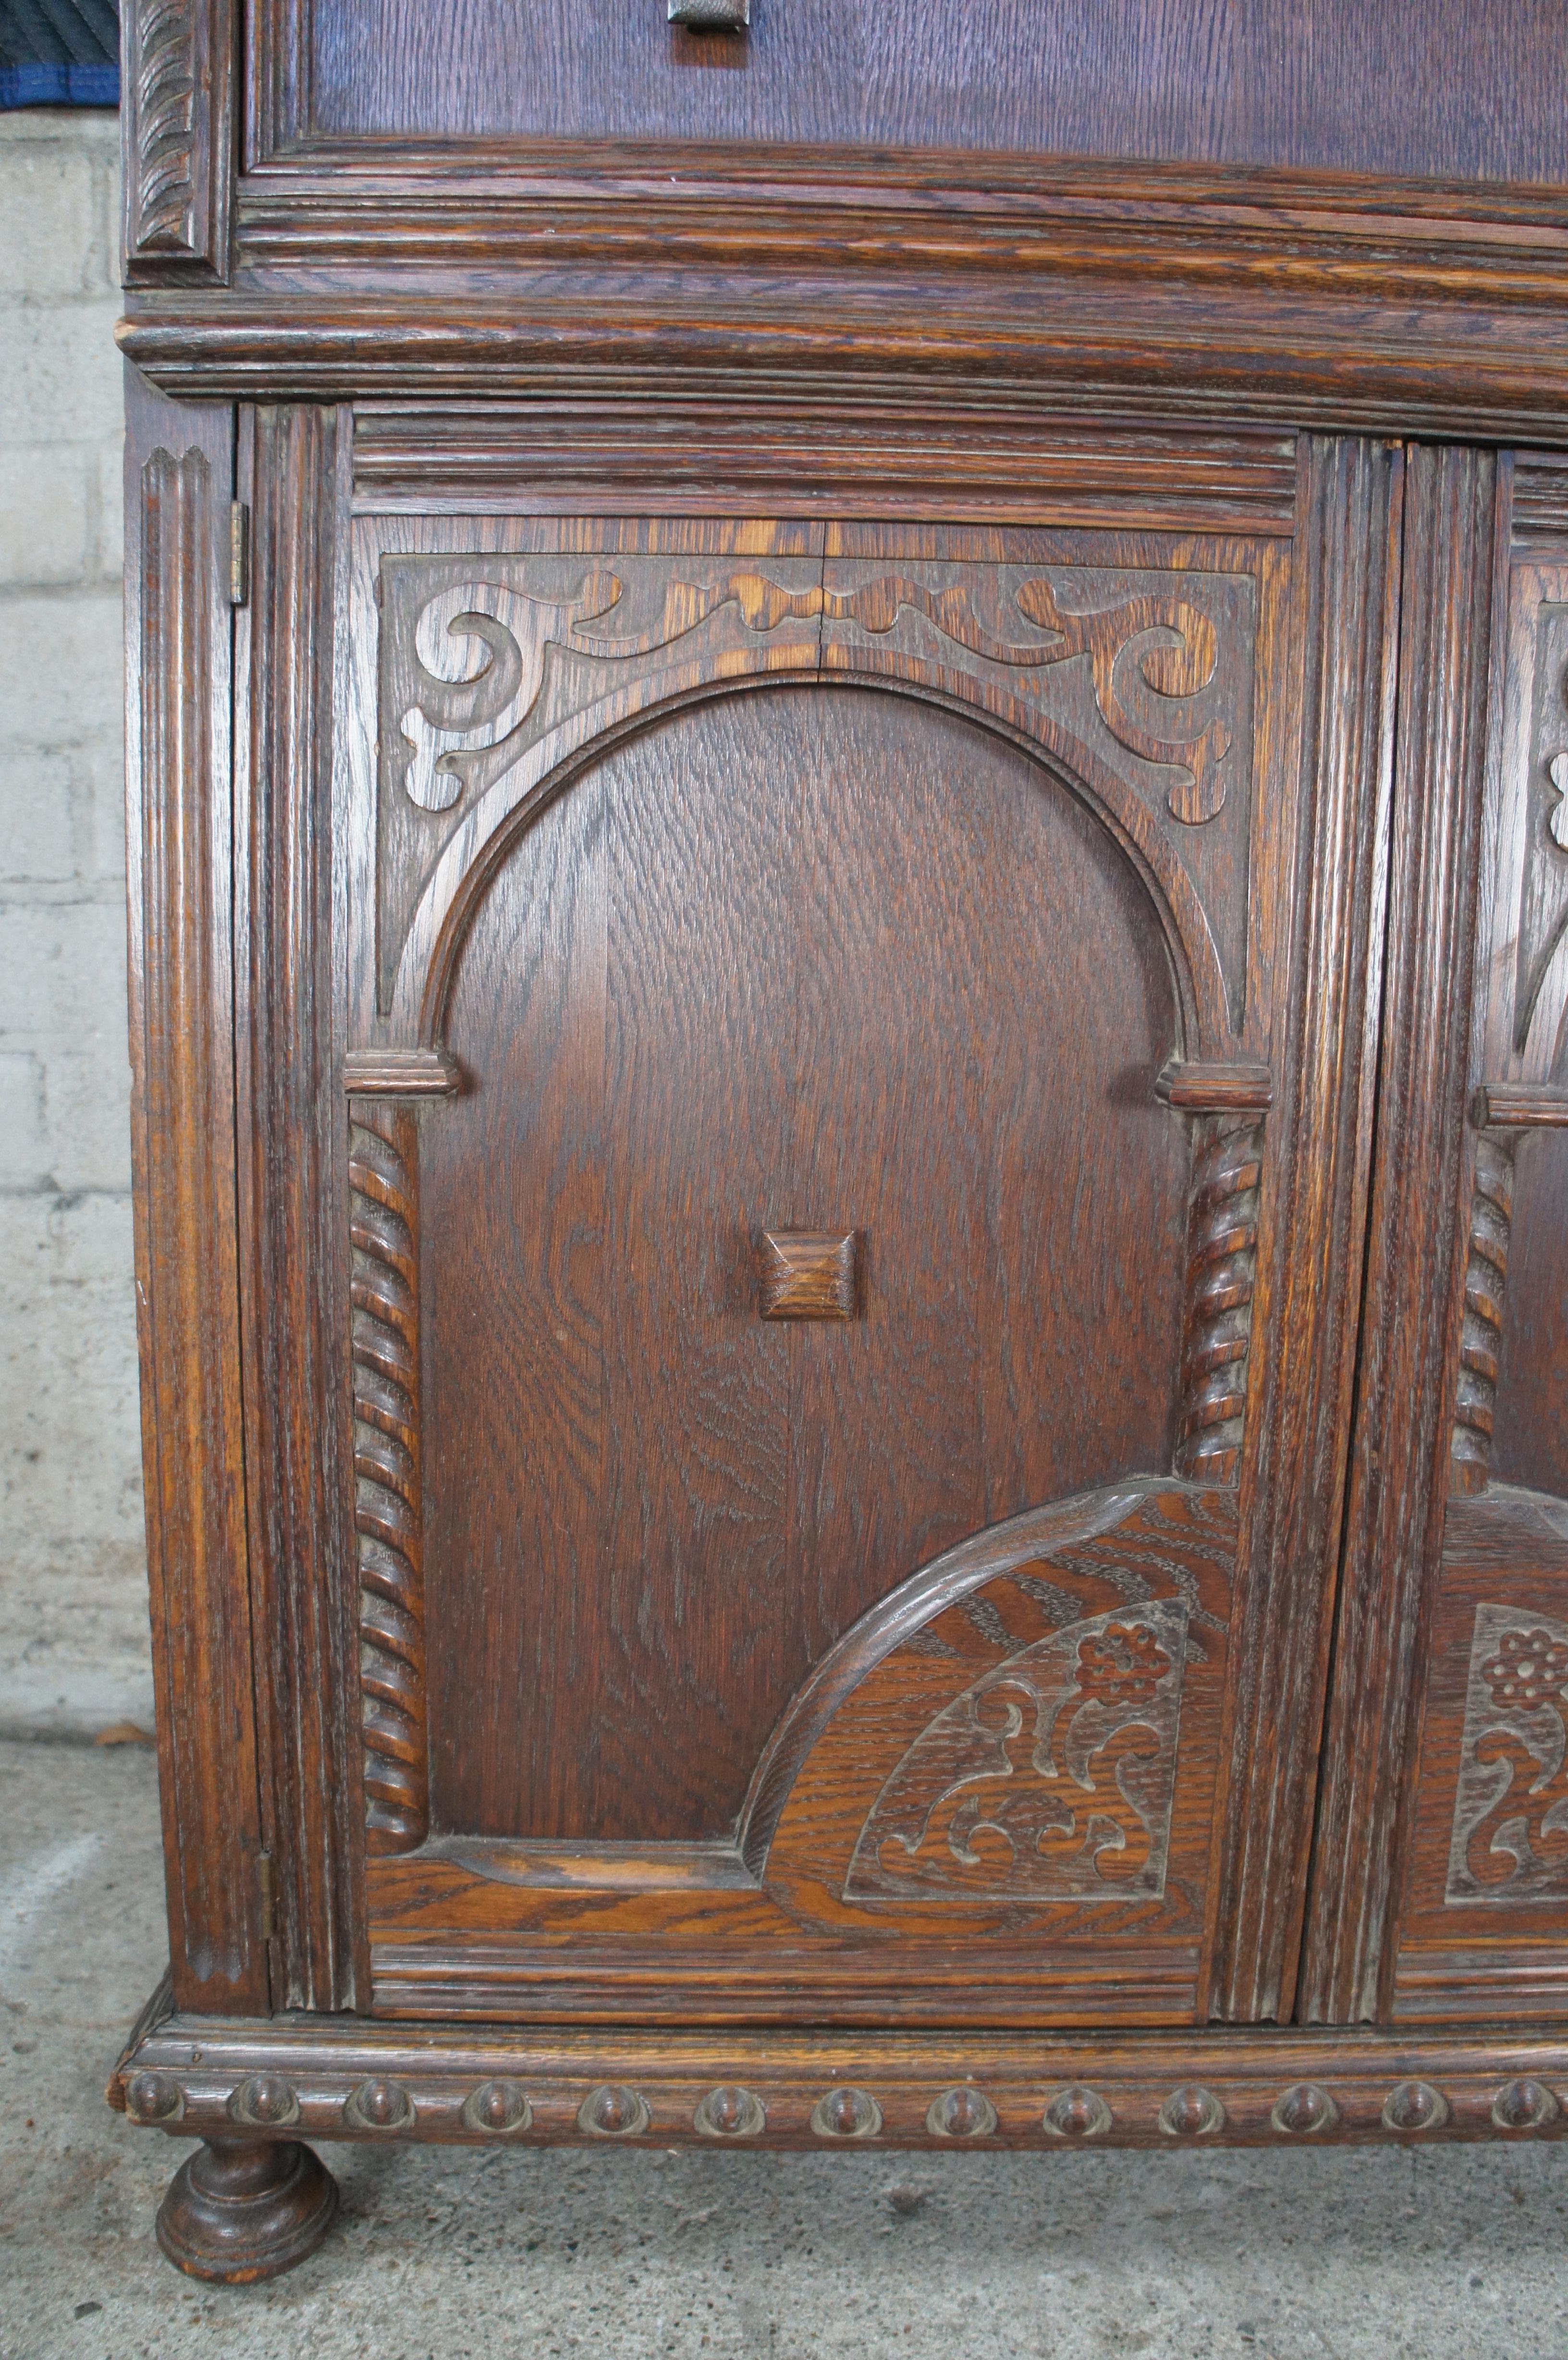 Early 20th Century Antique English Jacobean Style Carved Oak Court Cupboard Hutch Sideboard Dry Bar For Sale